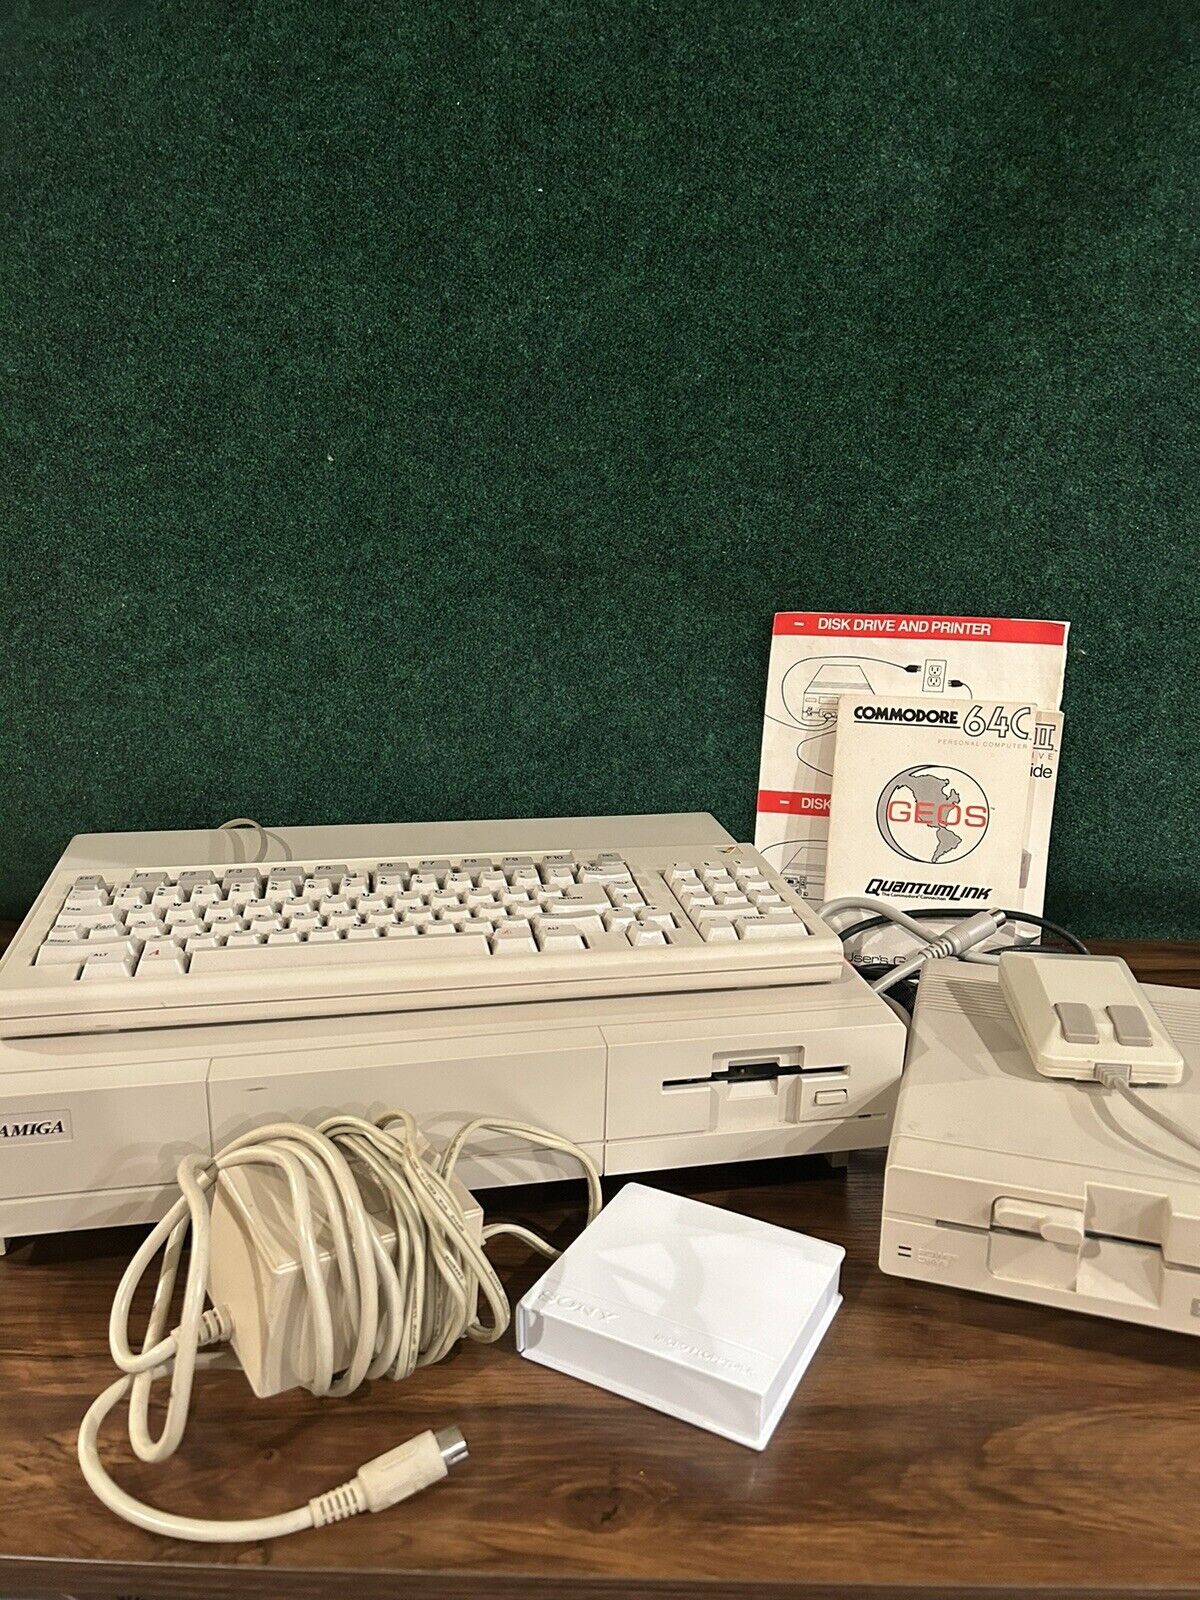 Commodore Amiga 1000 Vintage Desktop Computer System Working Tested